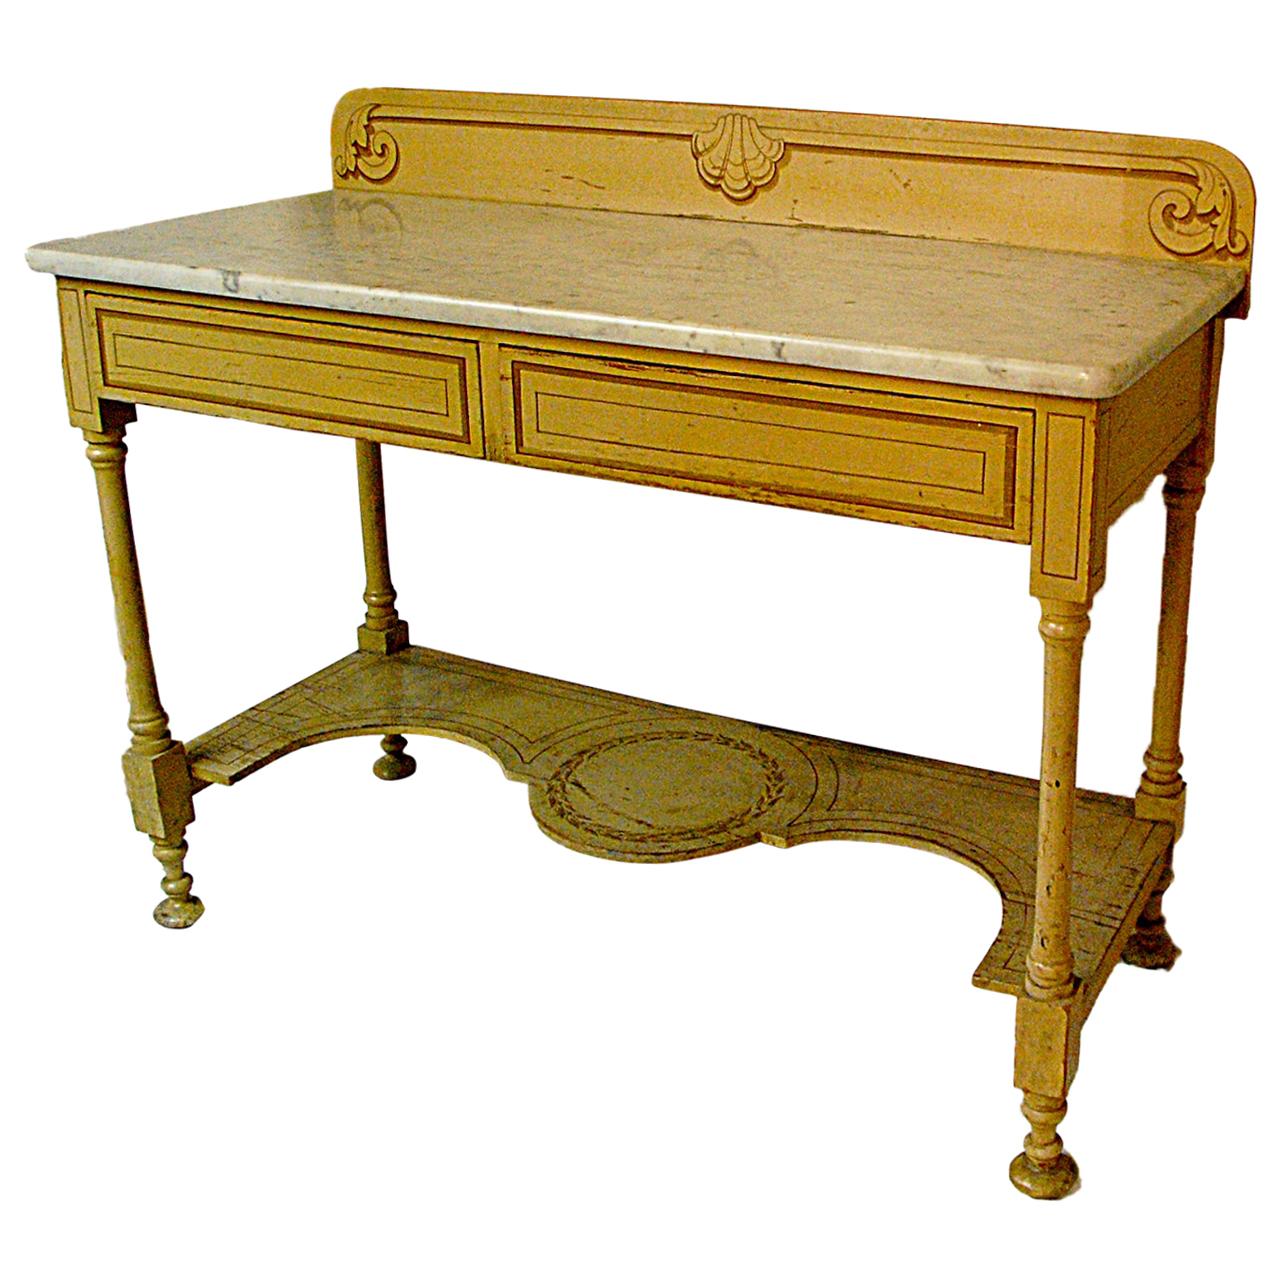 French Provincial Marble Top Two-Drawer Server with Original Decoration